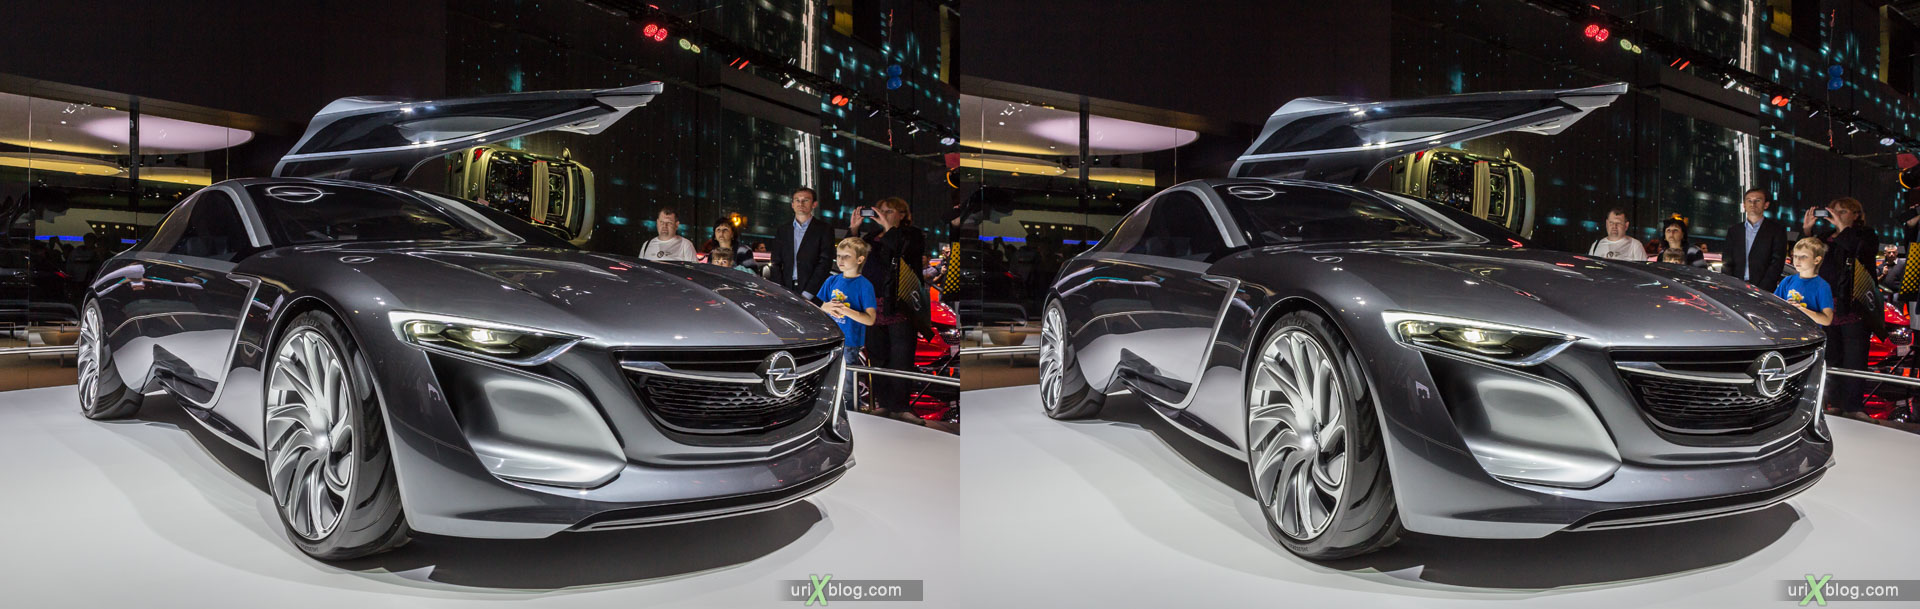 Opel Monza, Moscow International Automobile Salon 2014, MIAS 2014, girls, models, Crocus Expo, Moscow, Russia, 3D, stereo pair, cross-eyed, crossview, cross view stereo pair, stereoscopic, 2014